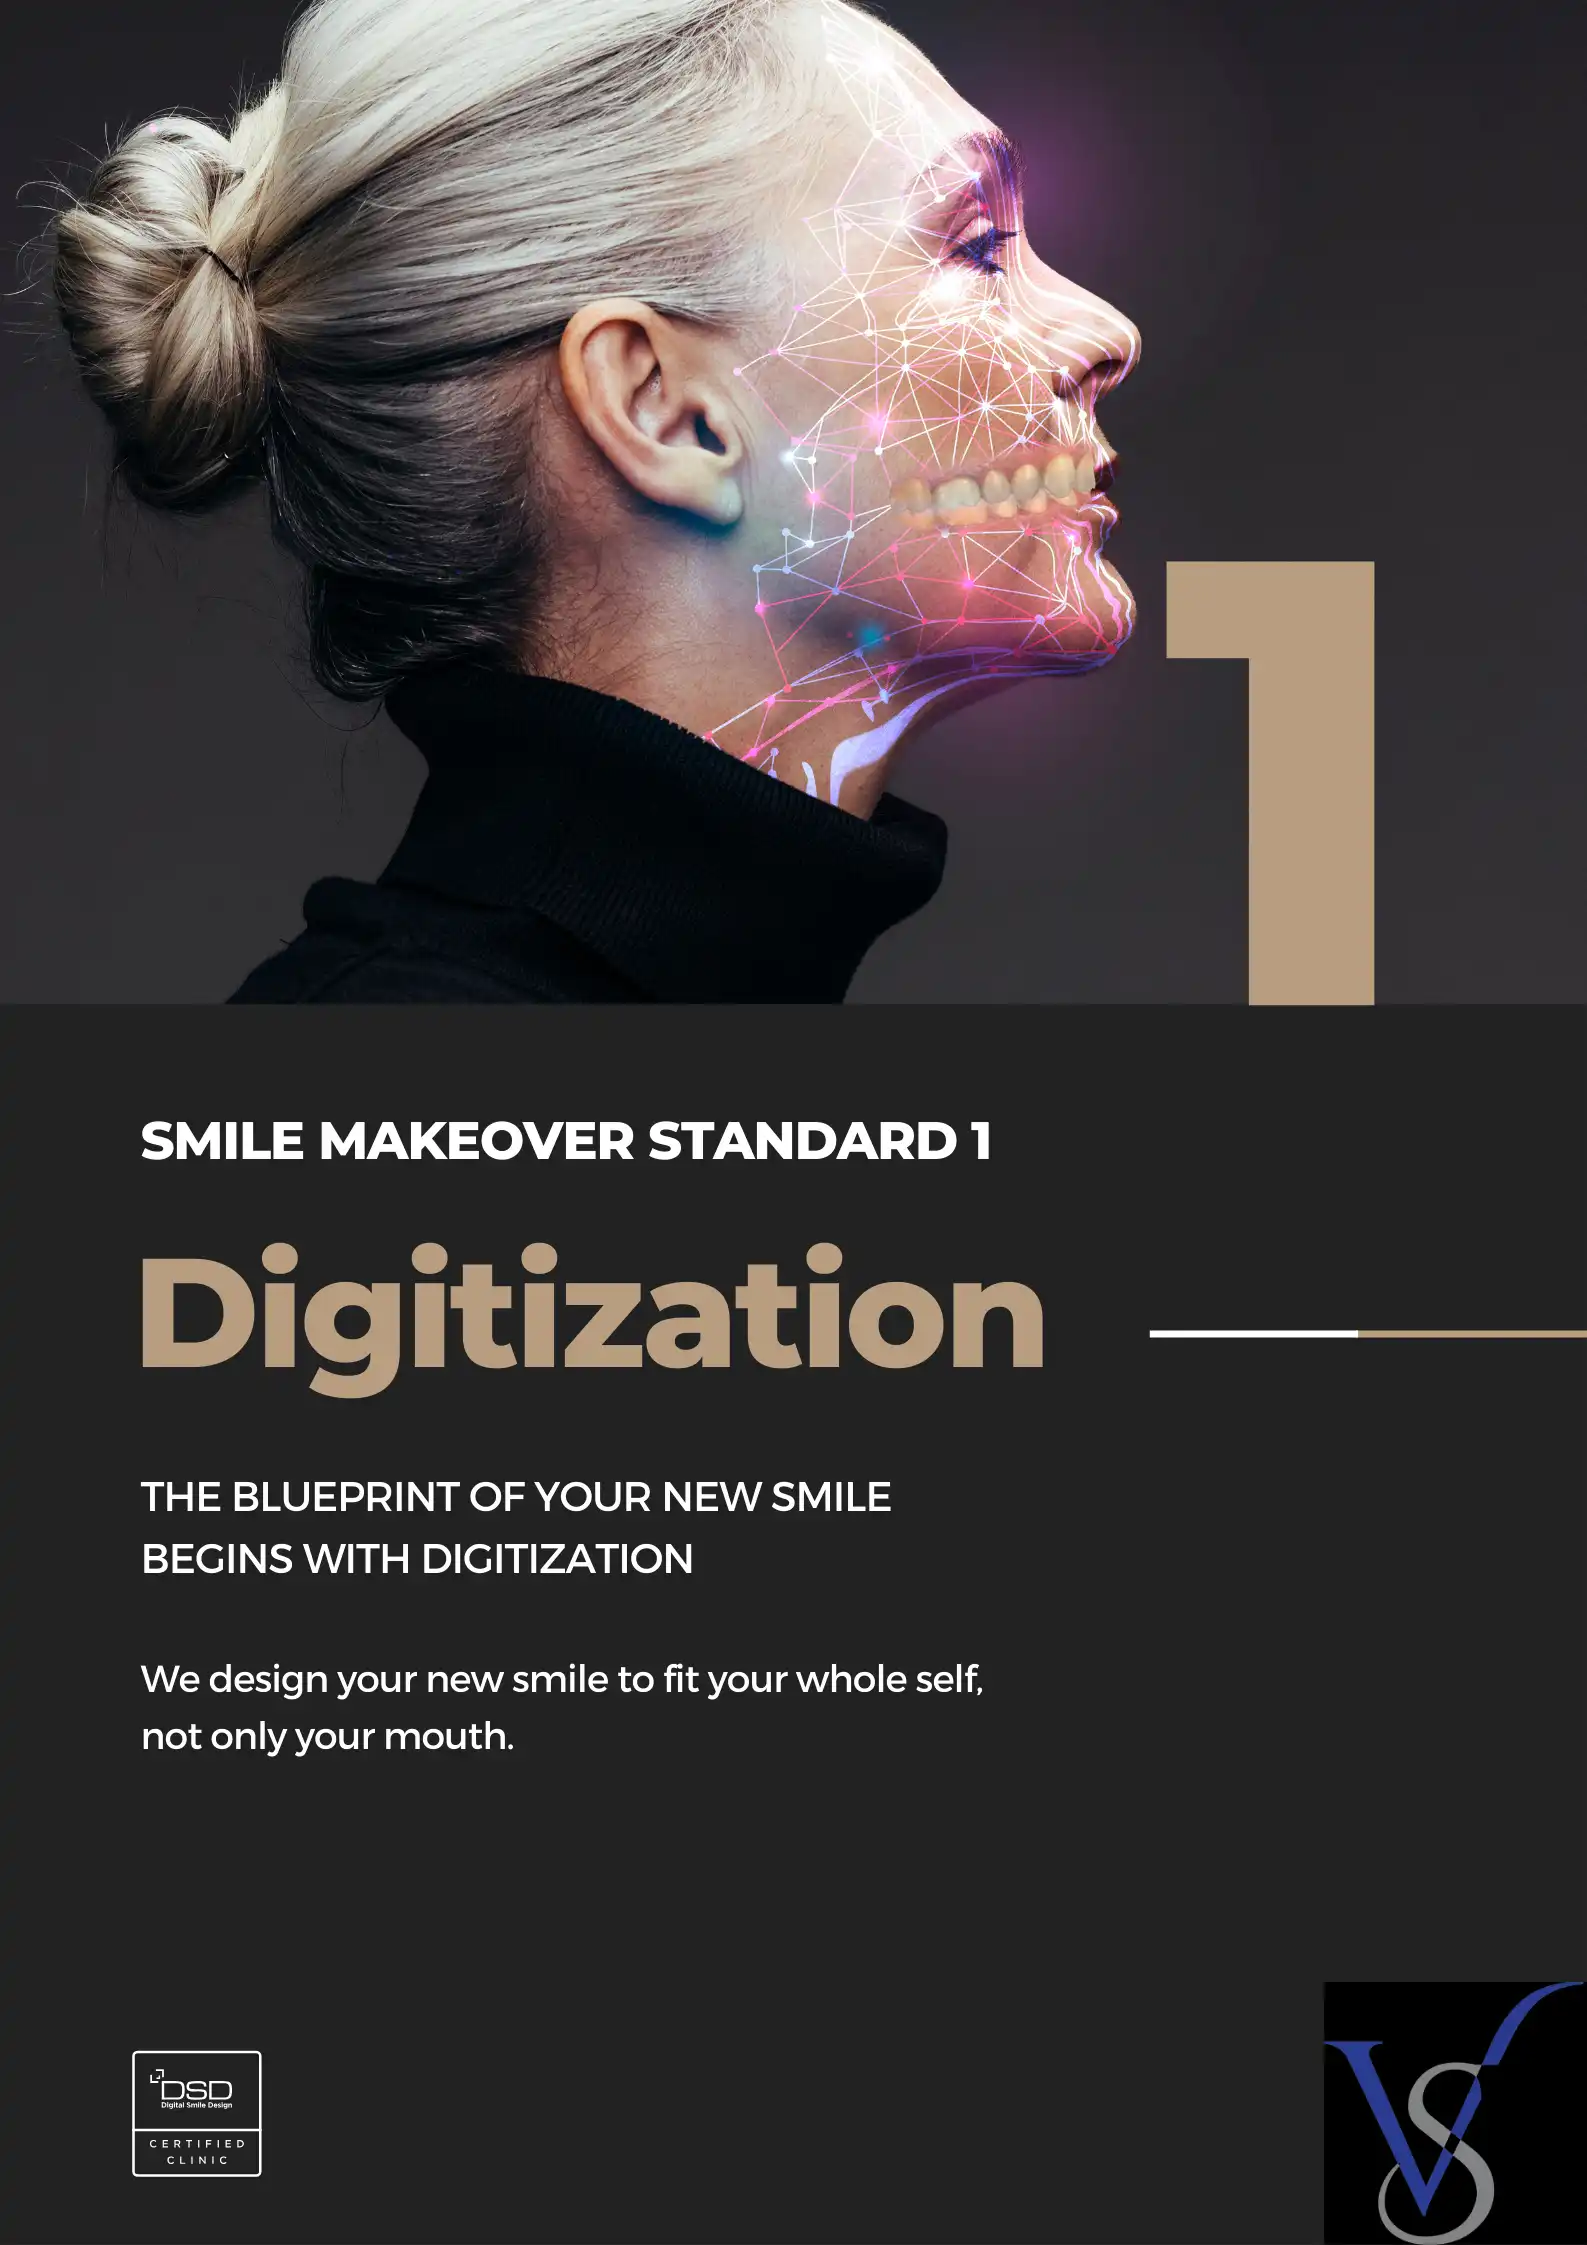 SMILE MAKEOVER STANDARD 1: THE BLUEPRINT OF YOUR NEW SMILE BEGINS WITH DIGITIZATION  “We design your new smile to fit your whole self, not only your mouth.